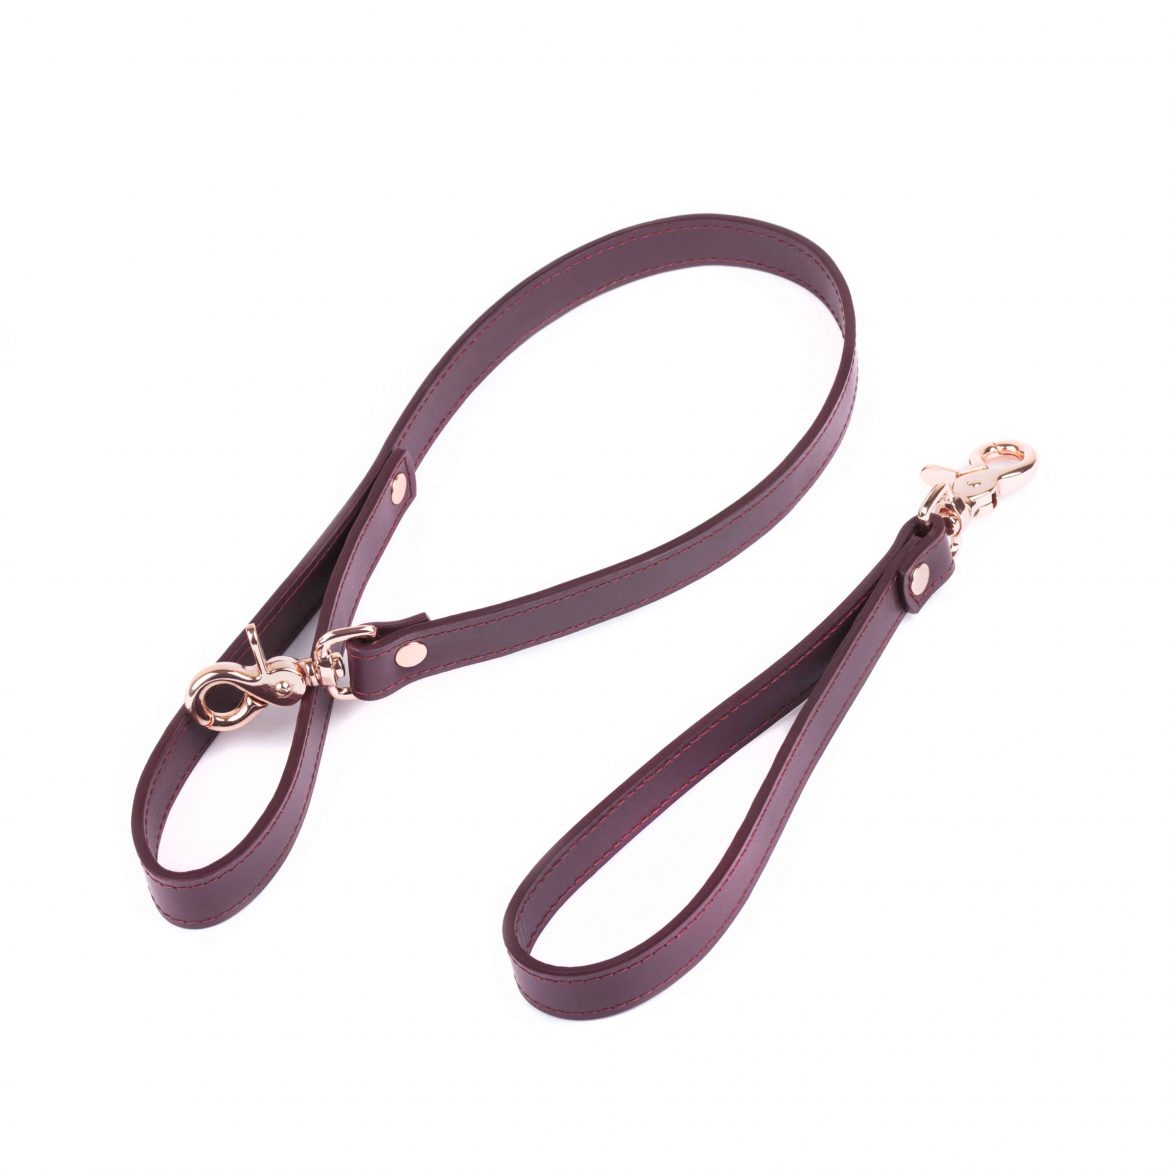 bdsm long leather leash 18 1 scaled